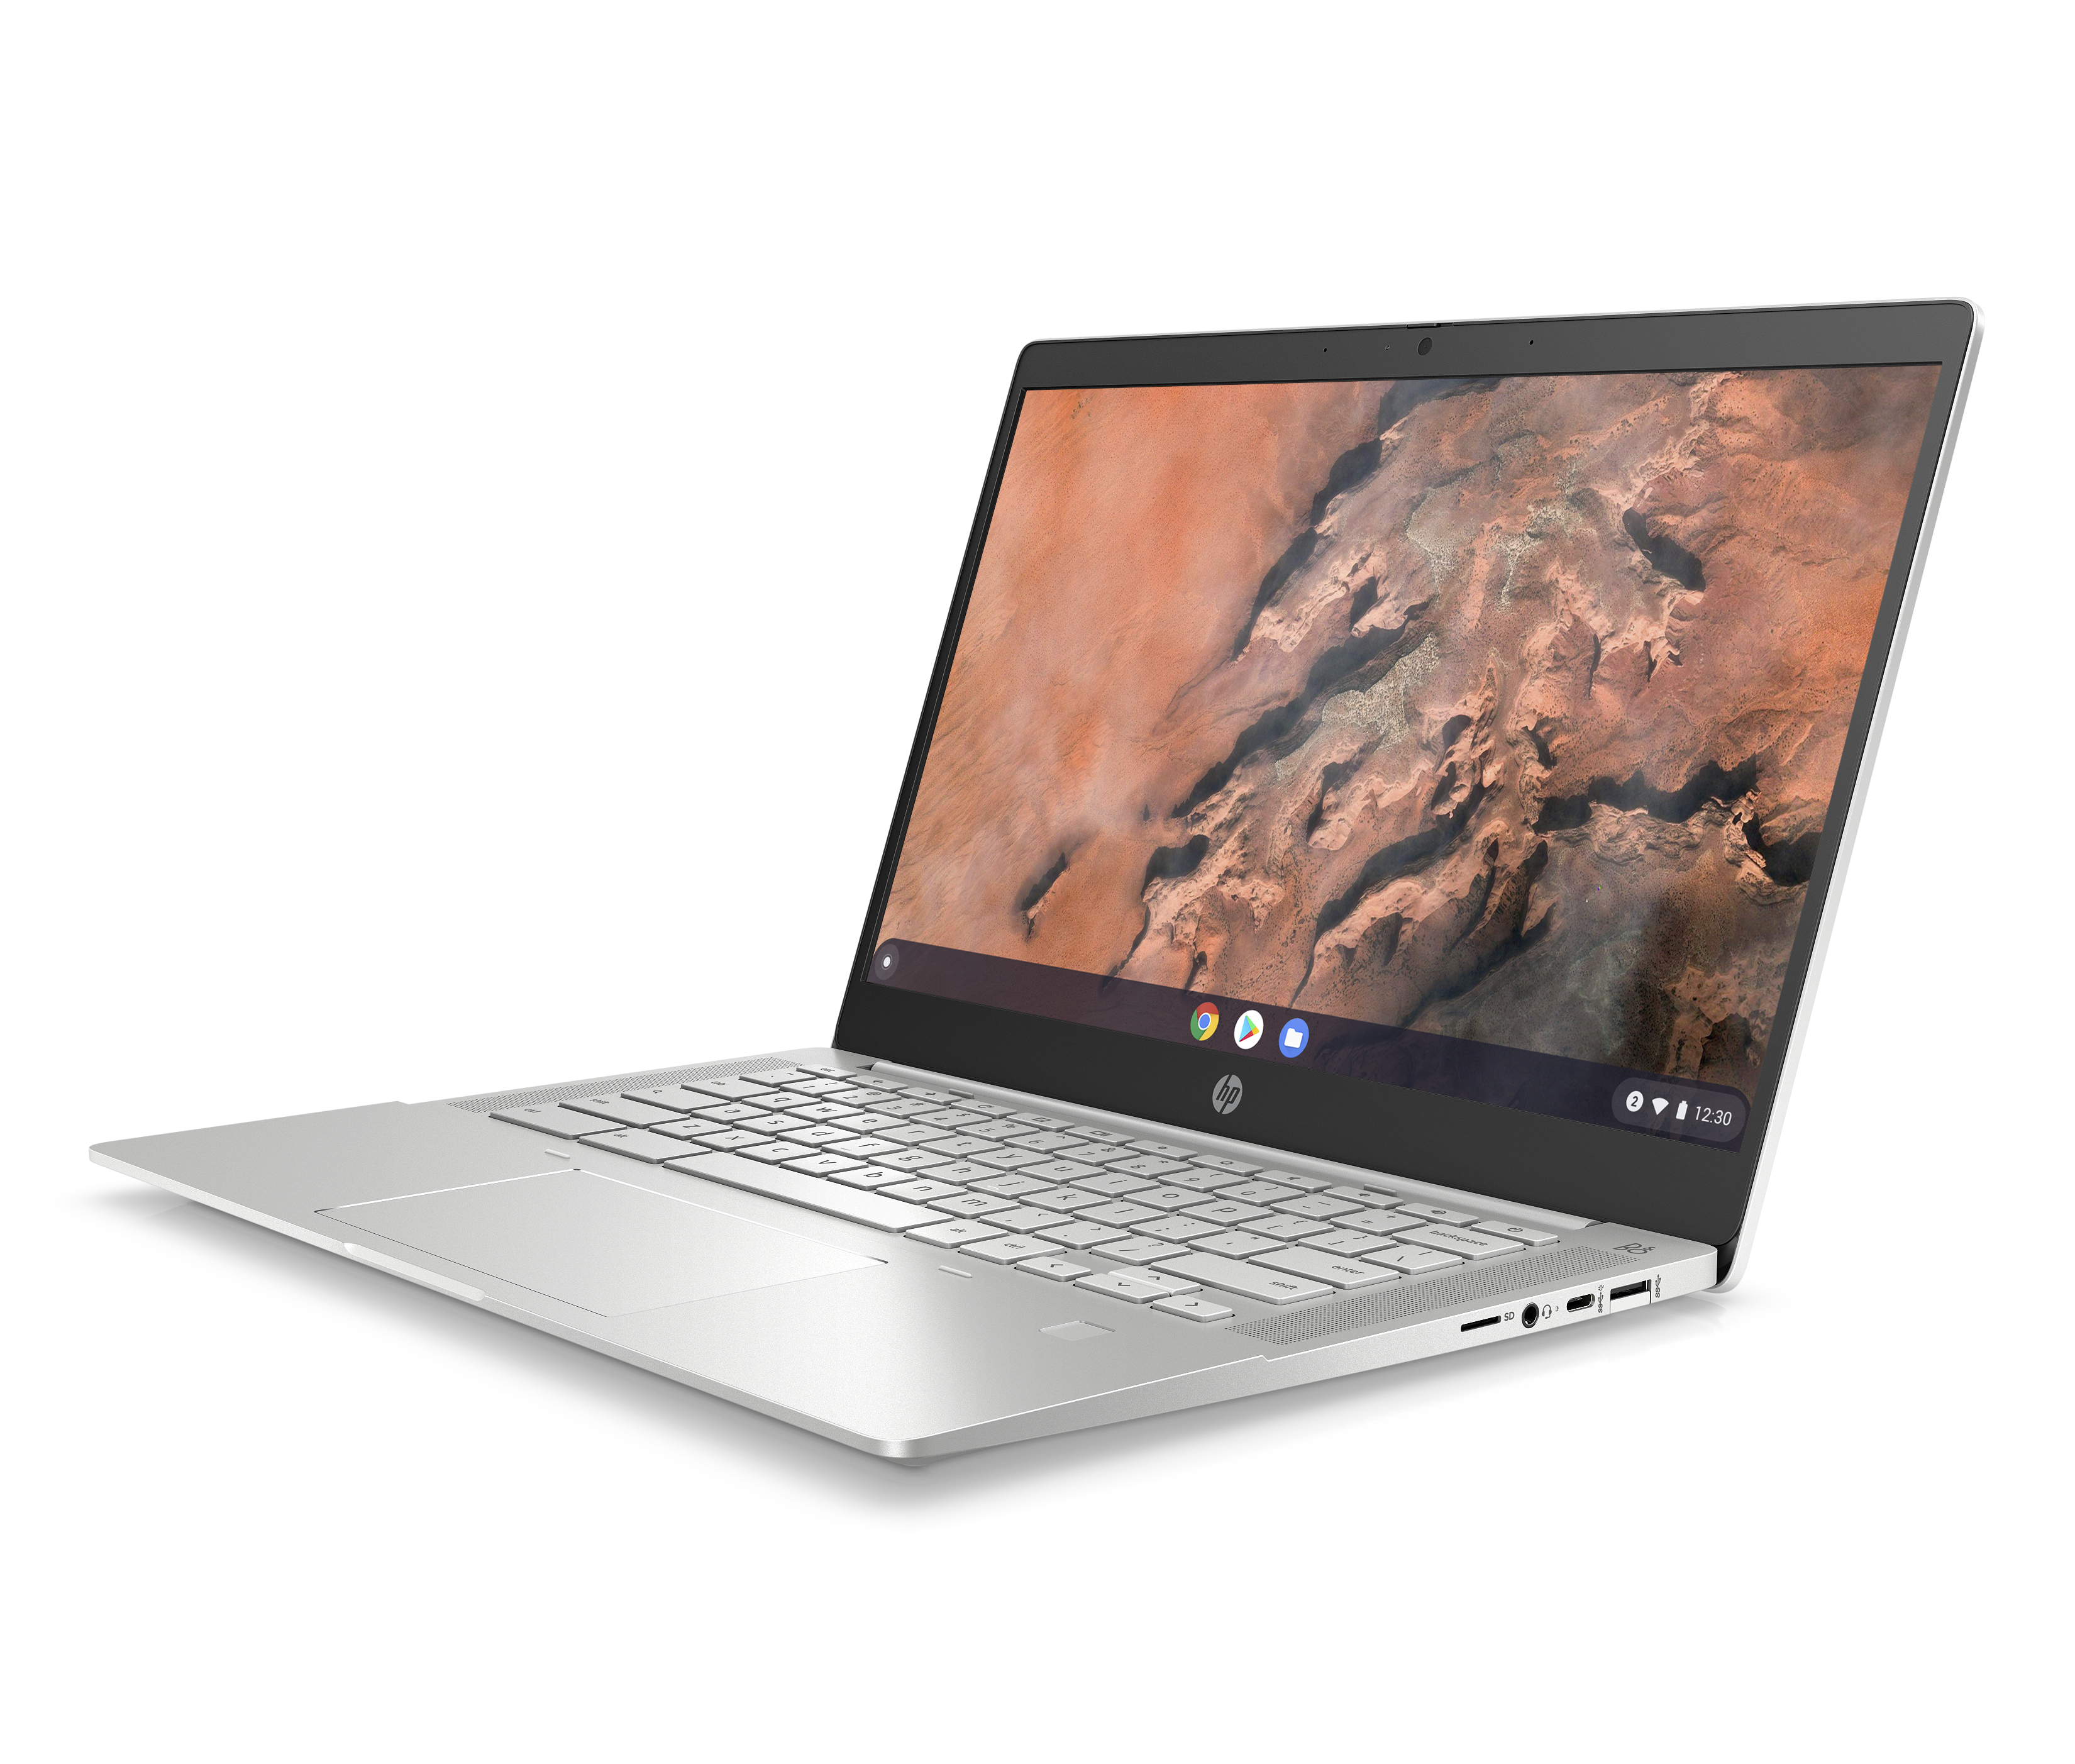 HP Pro c645 Chromebook Enterprise launches with brand new AMD chips, Radeon graphics